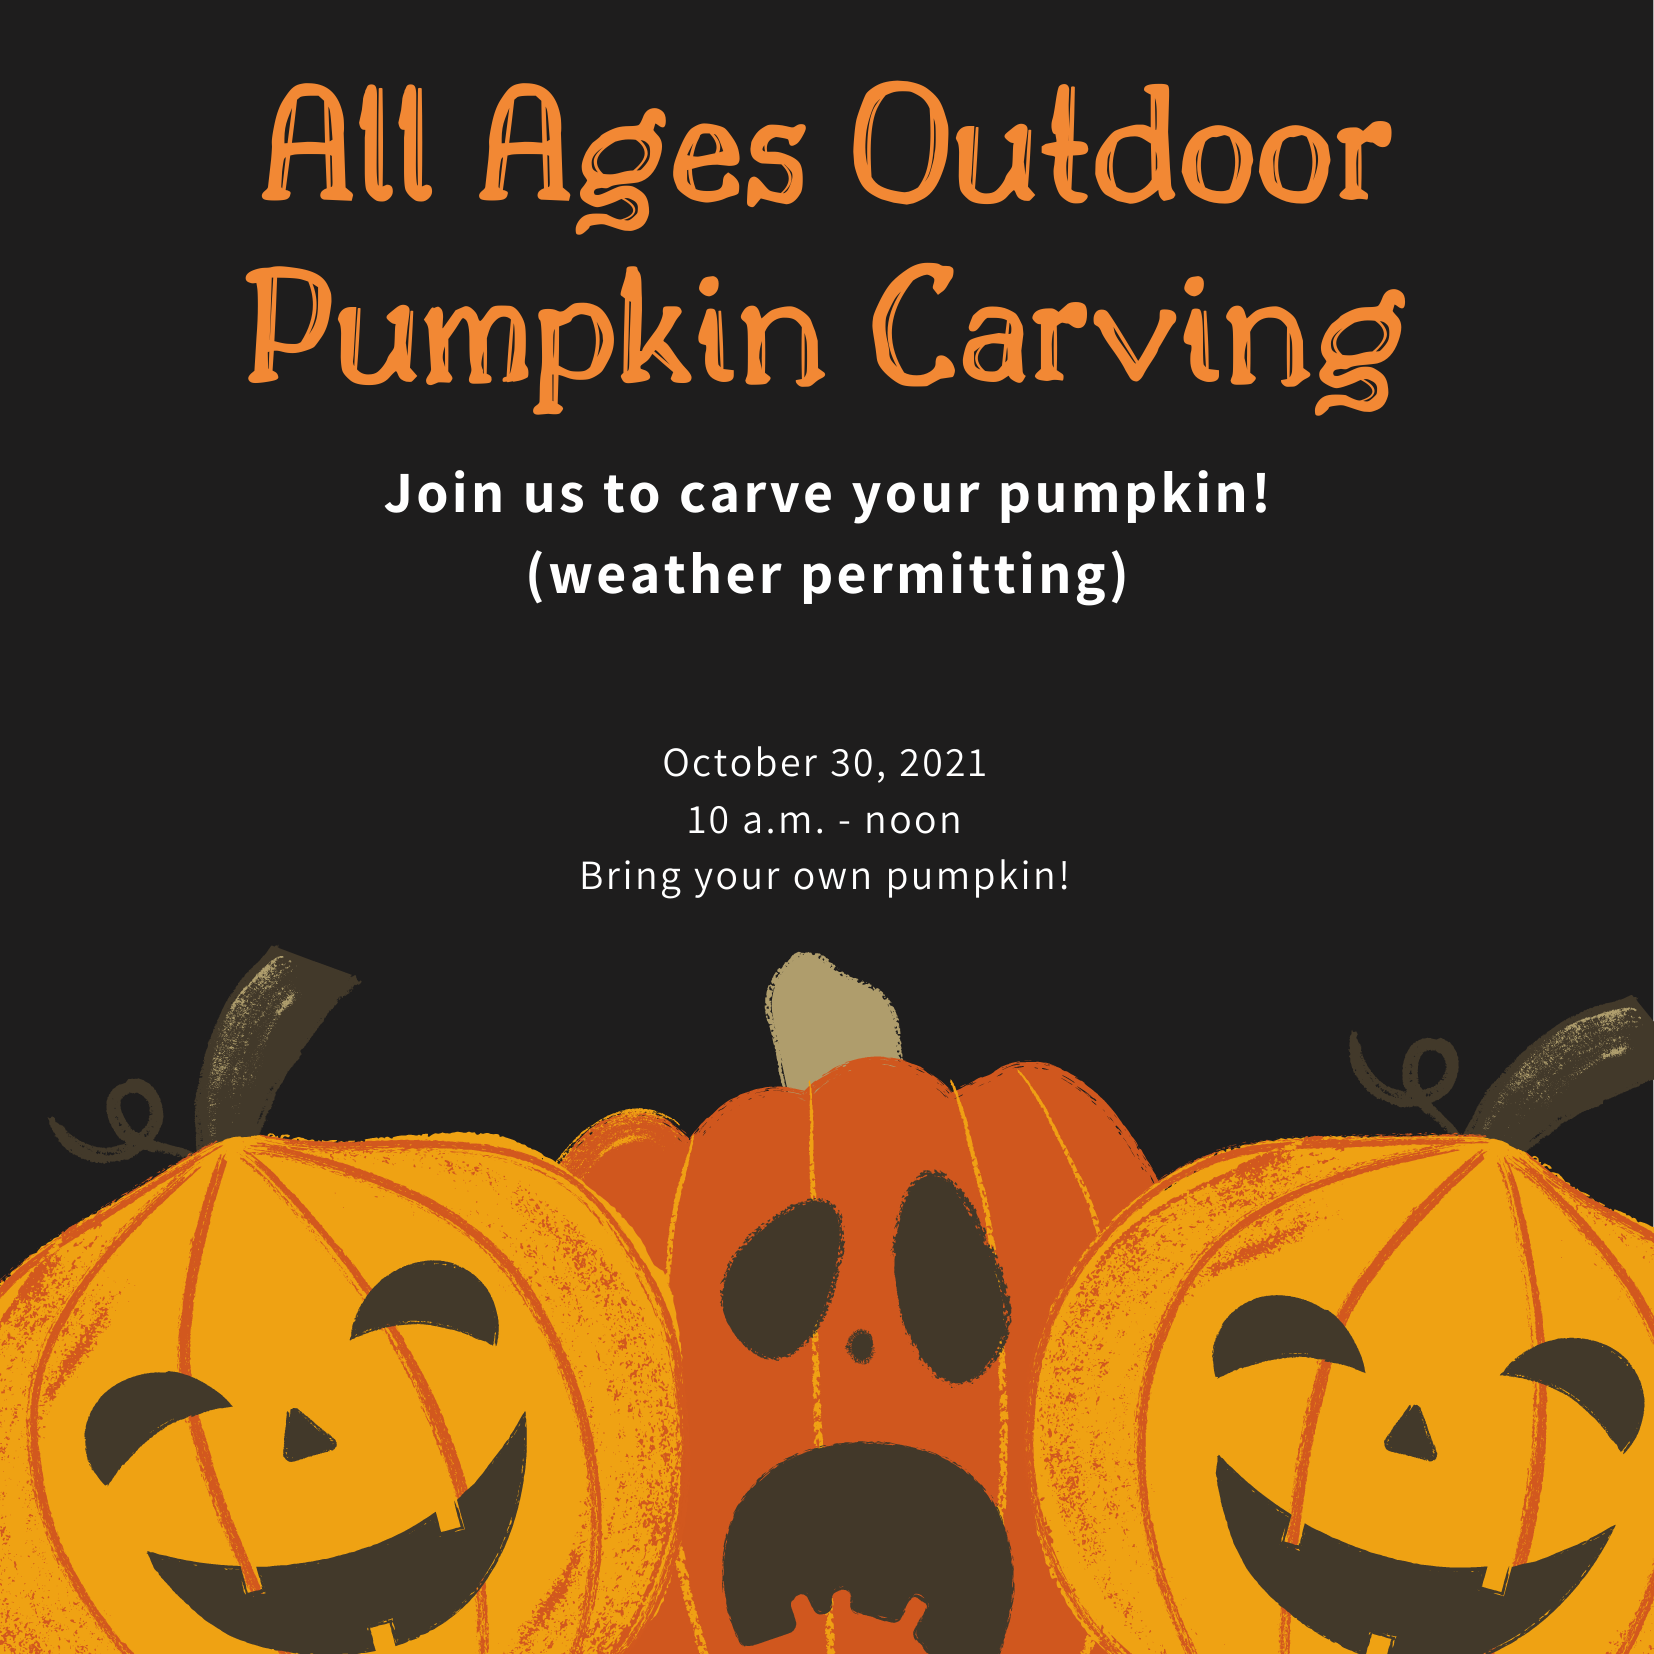 All Ages Outdoor Pumpkin Carving